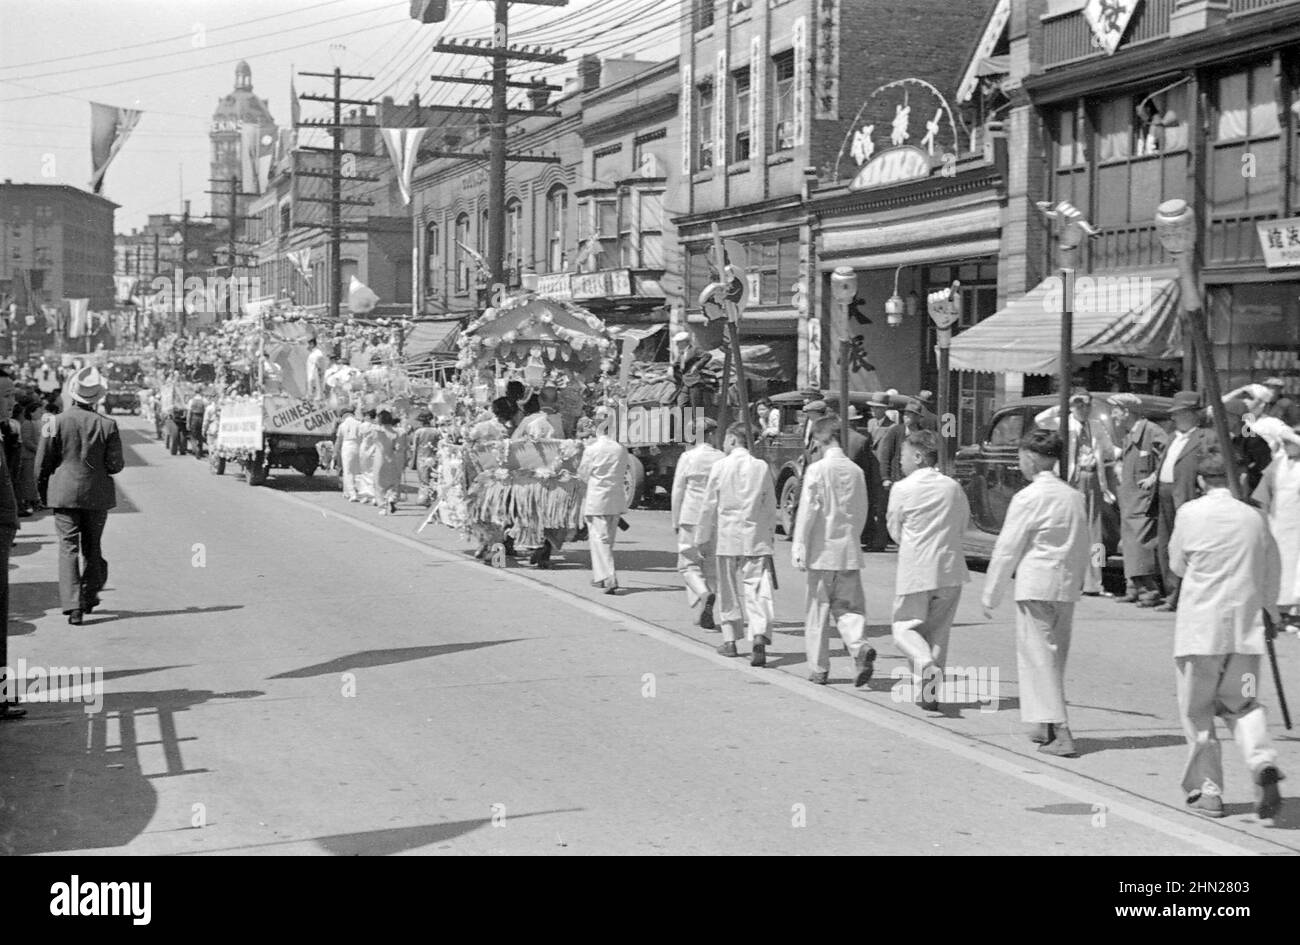 Vinatge black and white photograph ca. 1936 of a parade on Pender Street  in Chinatown,  Vancouver, British Columbia, Canada Stock Photo